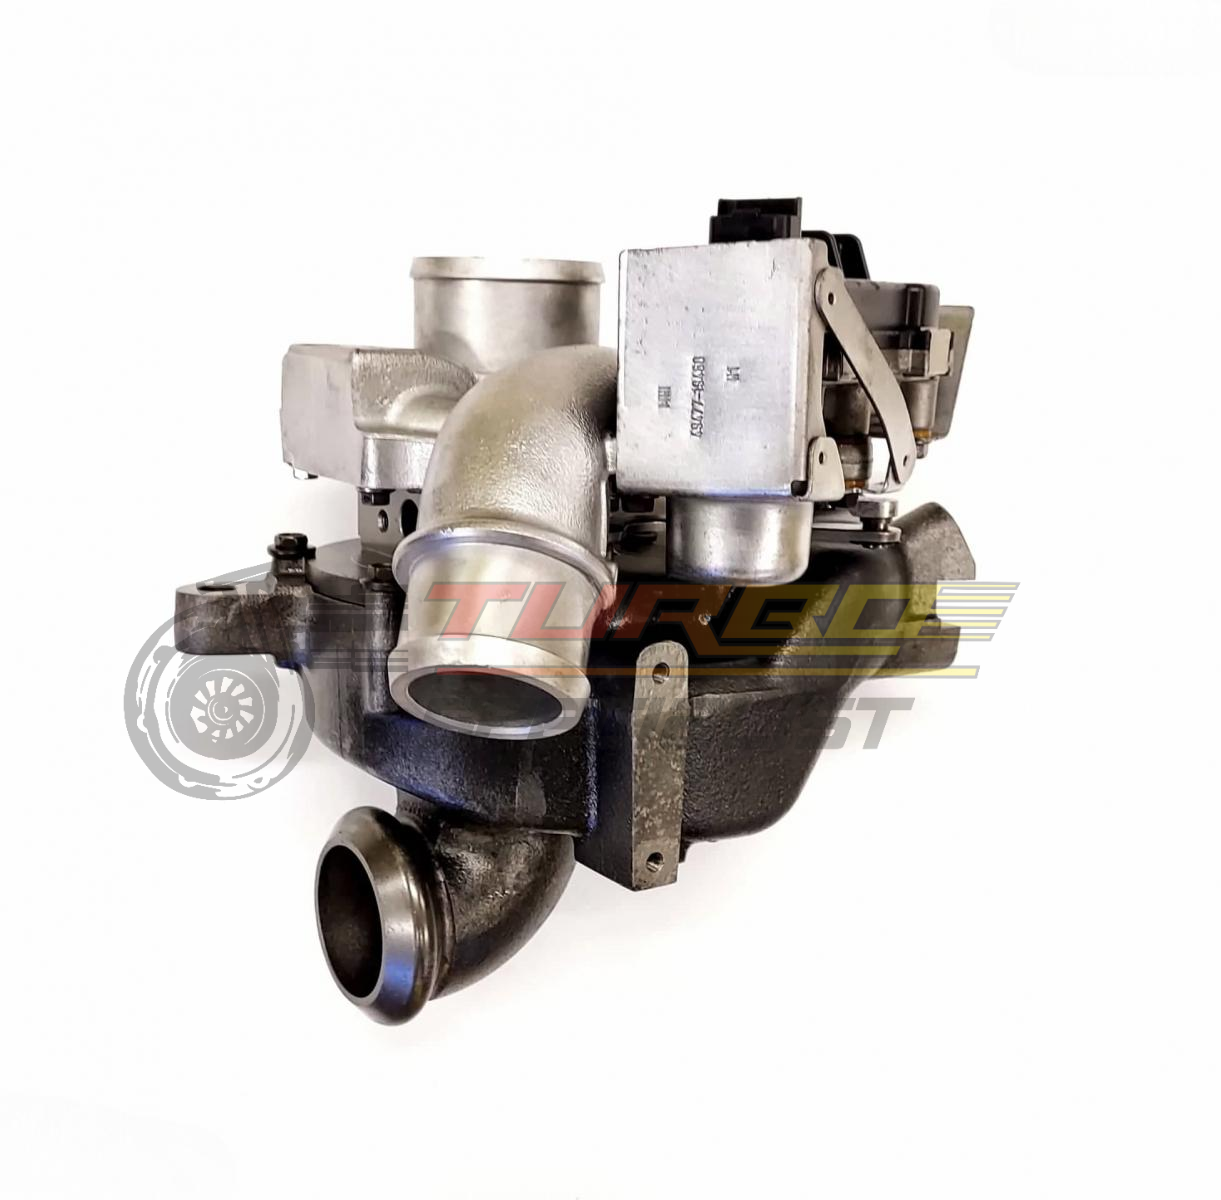 FORD GALAXY/ S-MAX /MONDEO  2.2TDCi 147kW-200HP 49477-01114 TURBO TURBOCHARGER